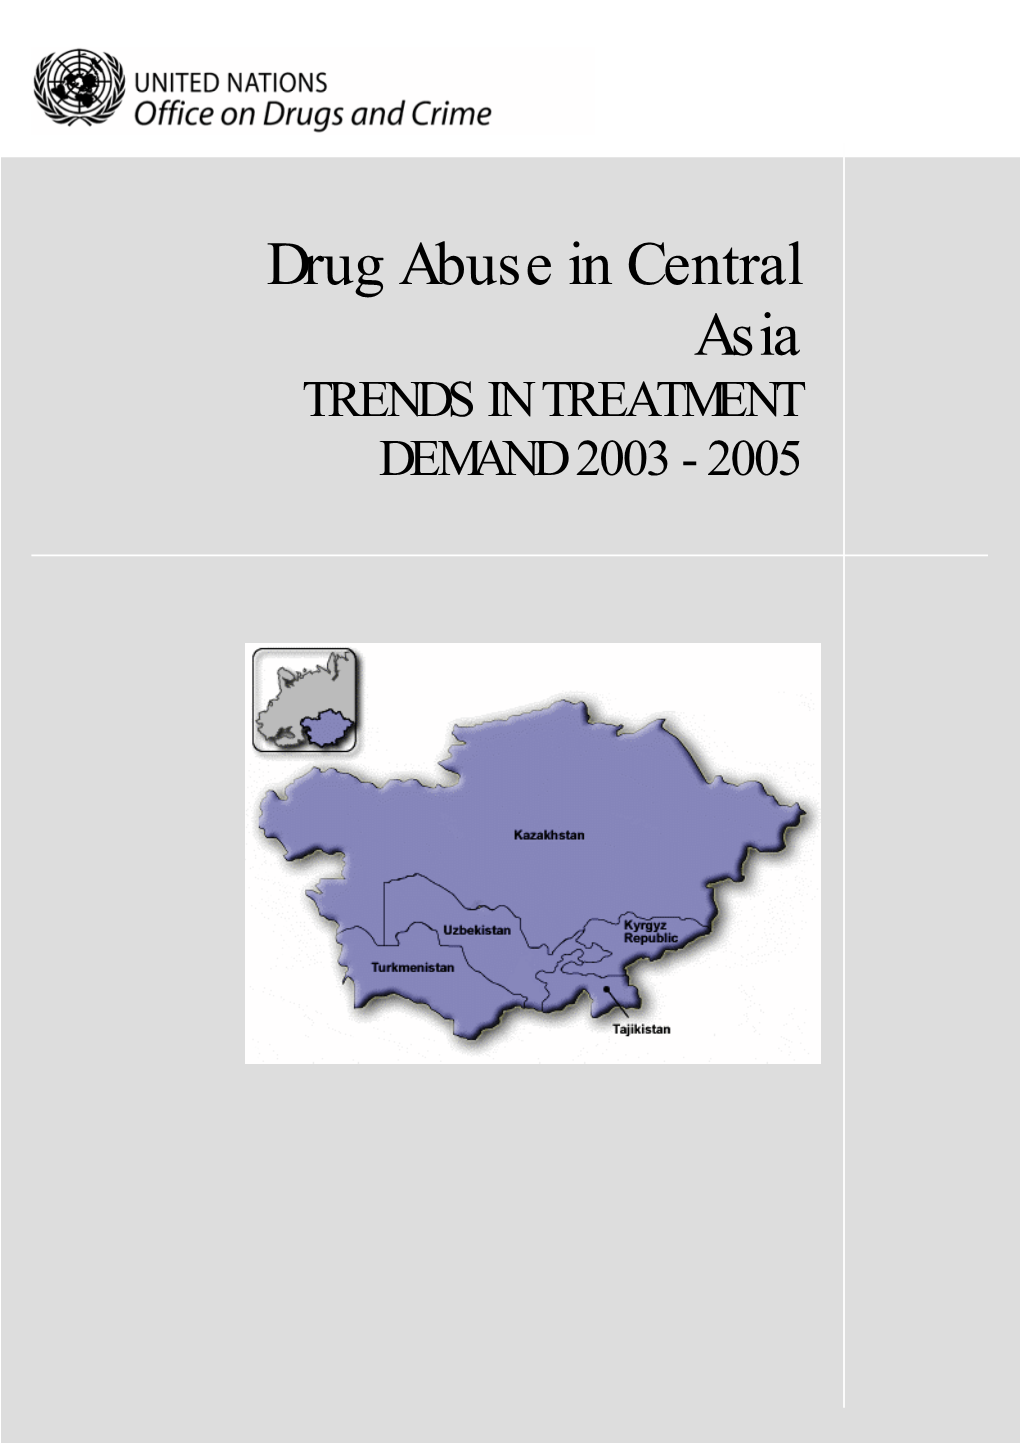 Drug Abuse in Central Asia TRENDS in TREATMENT DEMAND 2003 - 2005